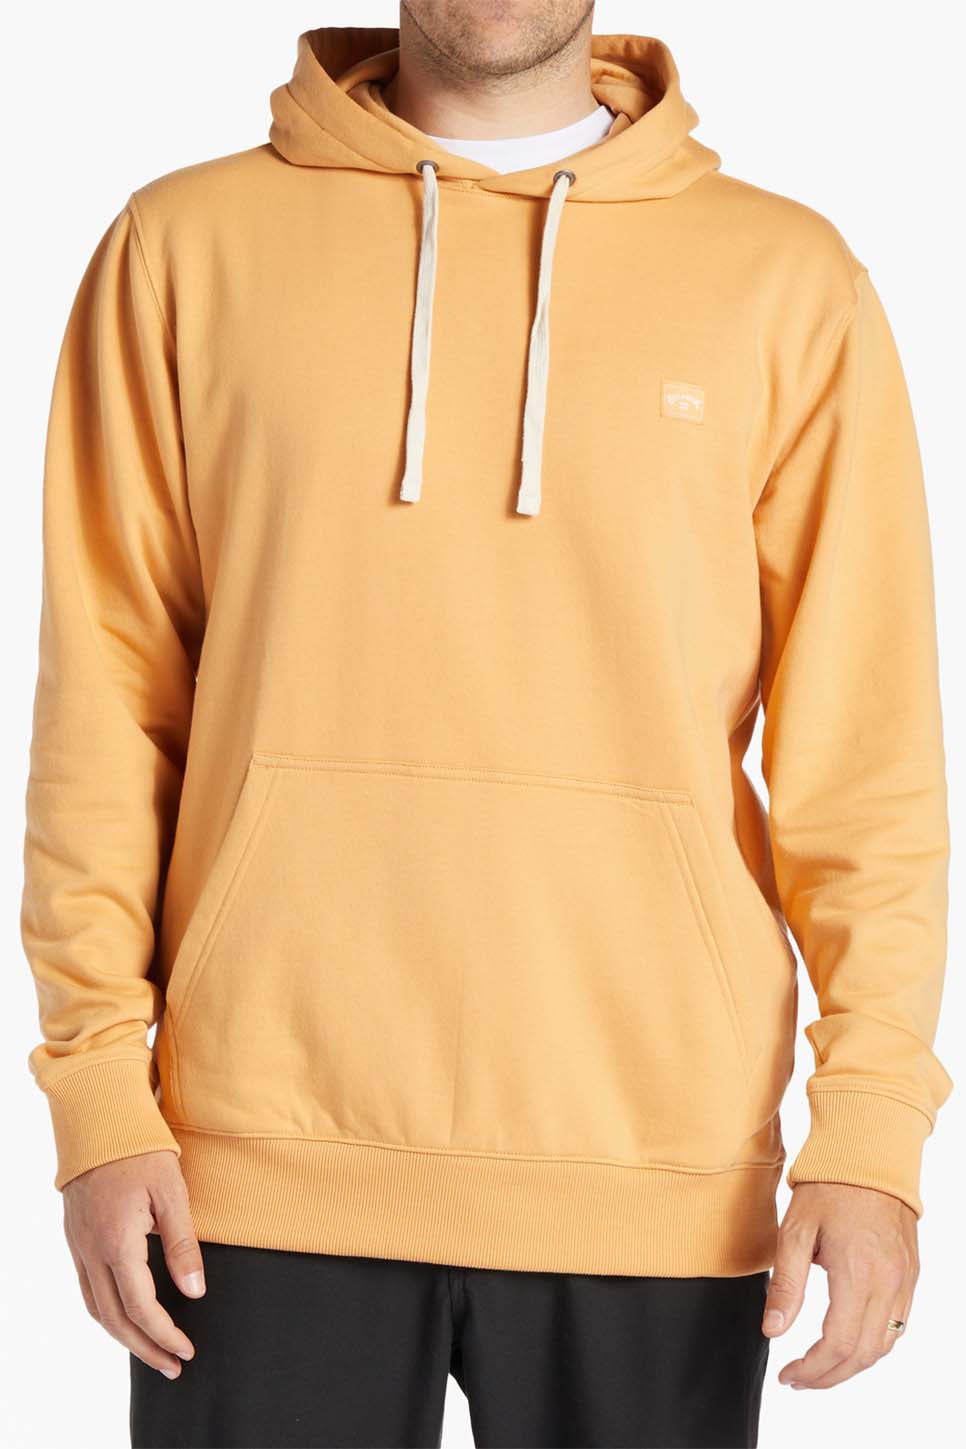 Billabong - All Day PO Hoodie - Dusty Cantaloupe - Front